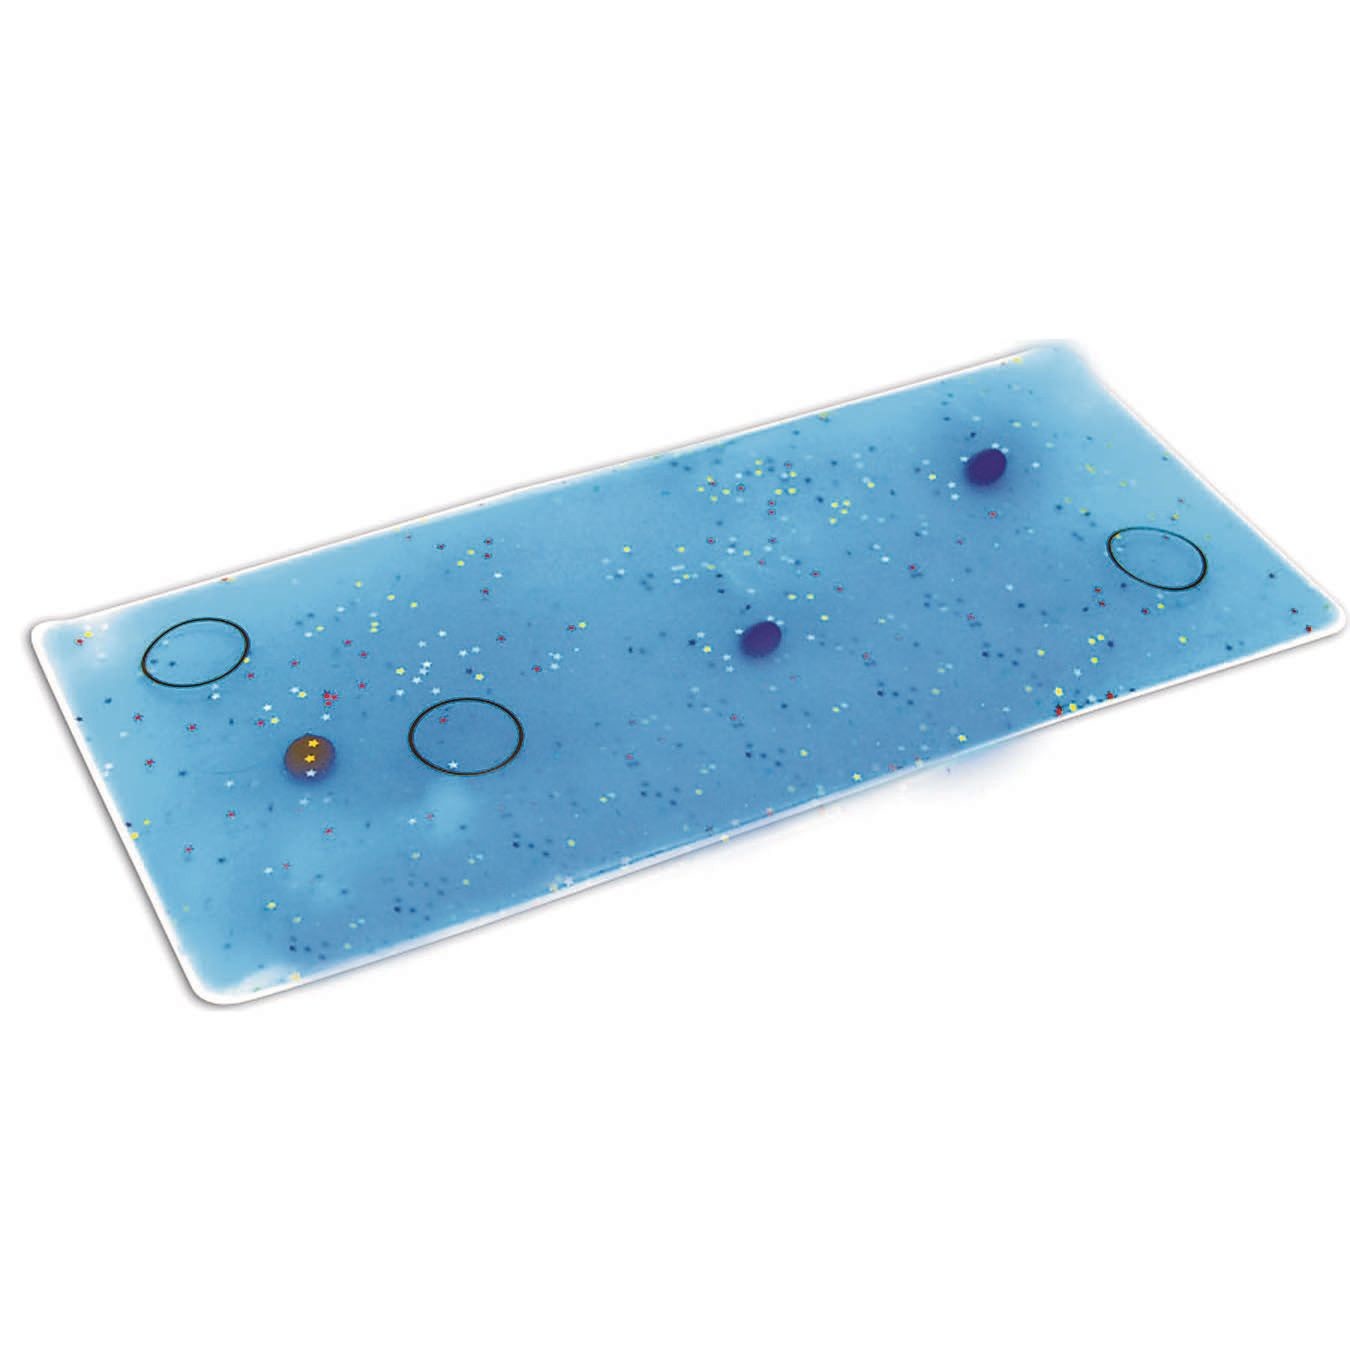 Buy Sensory Stimulation Gel Pad S&S Worldwide at with Marbles